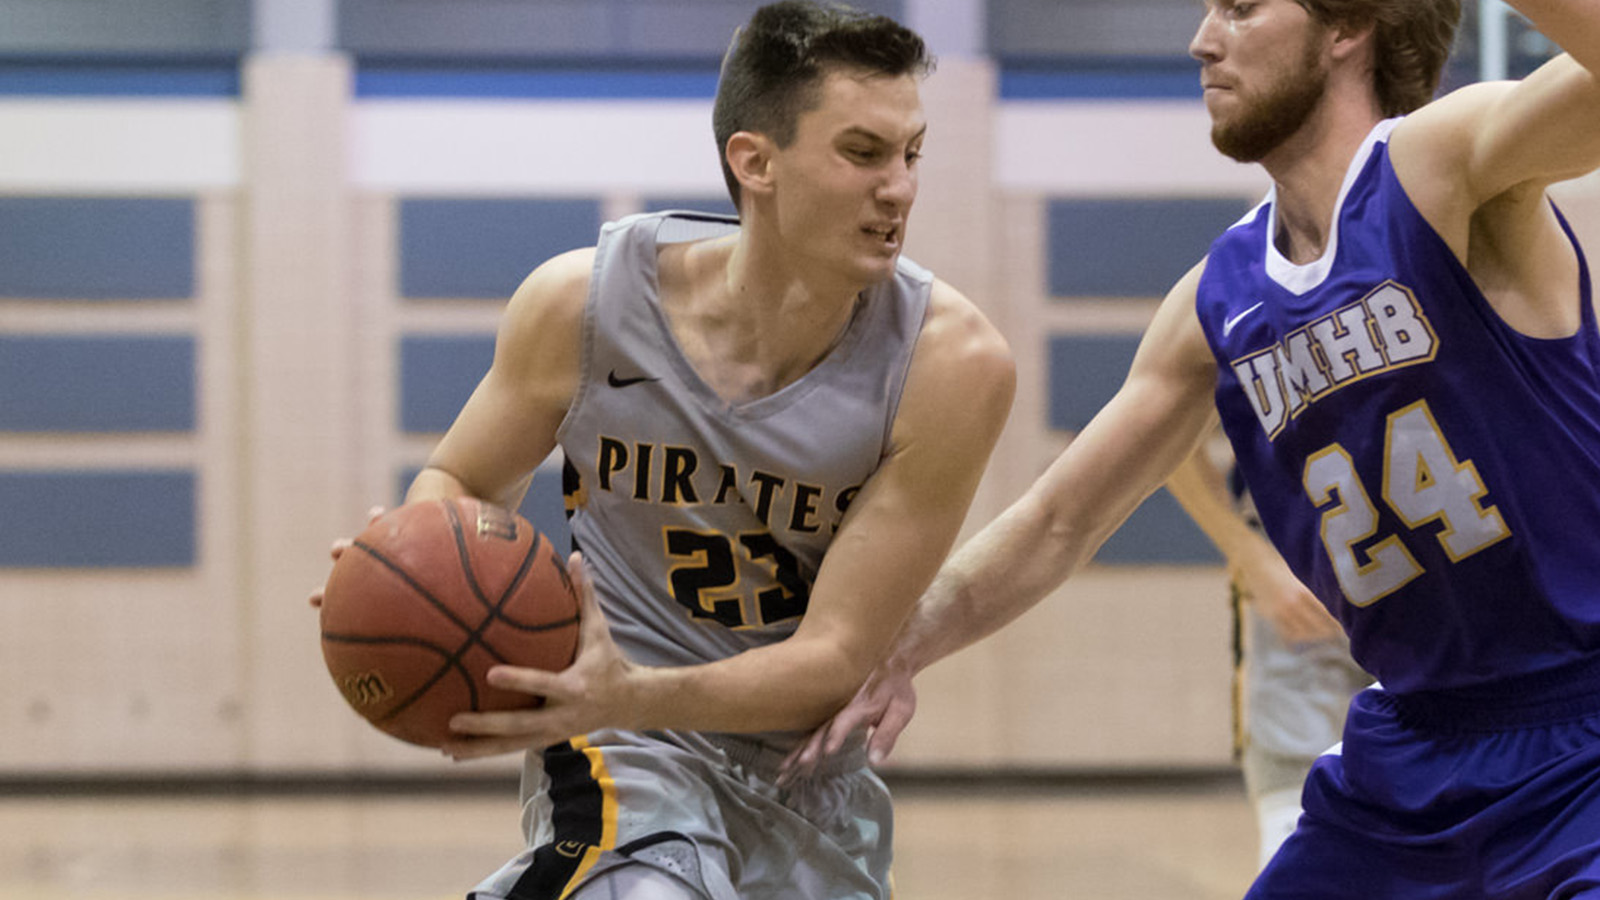 Pirates Fall Short to Trinity in Double Overtime Thriller